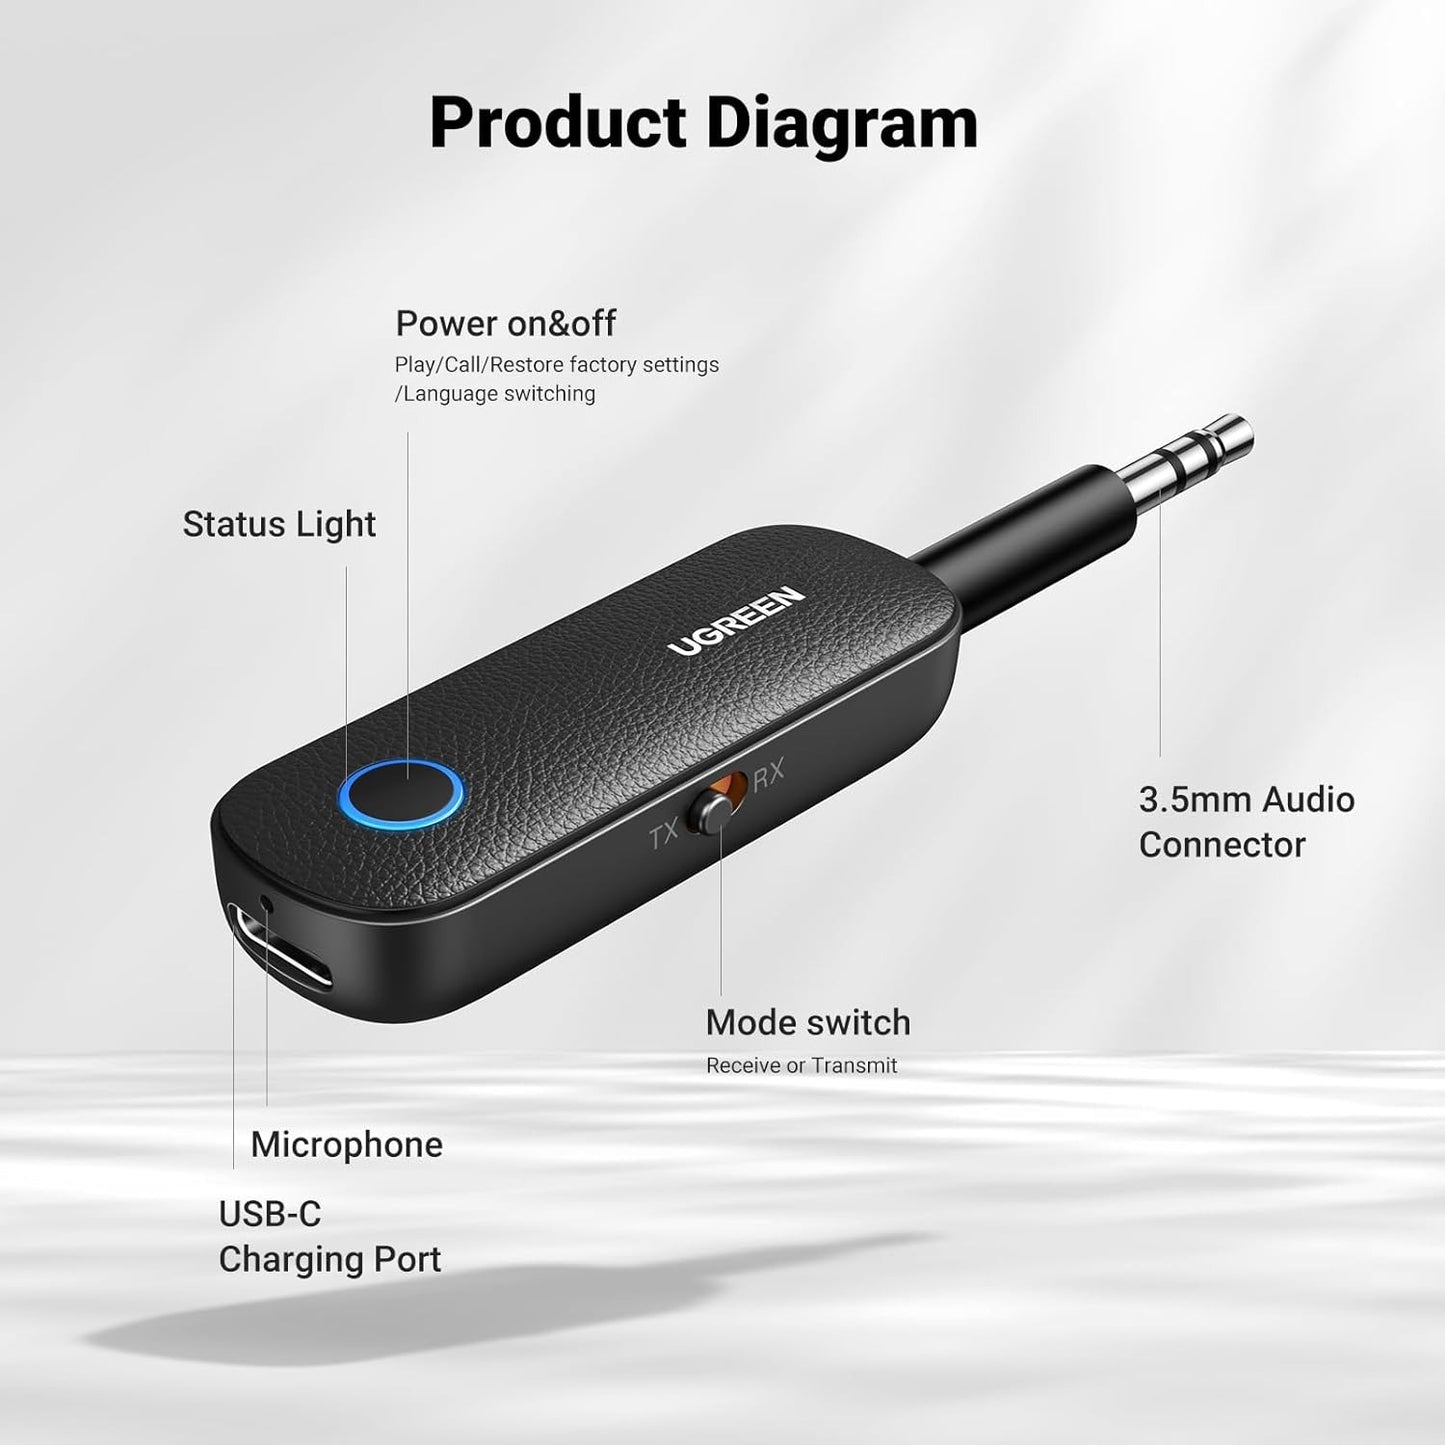 UGREEN 2-in-1 Wireless Bluetooth 5.0 Mini 3.5mm Auxiliary Audio Jack Transmitter & Receiver Adapter with 2400MHz Range, 10M Operating Distance, 5-8 Hours Battery Life for PC, Tablet, Speakers, Projectors, Laptop, Smartphone | 80893